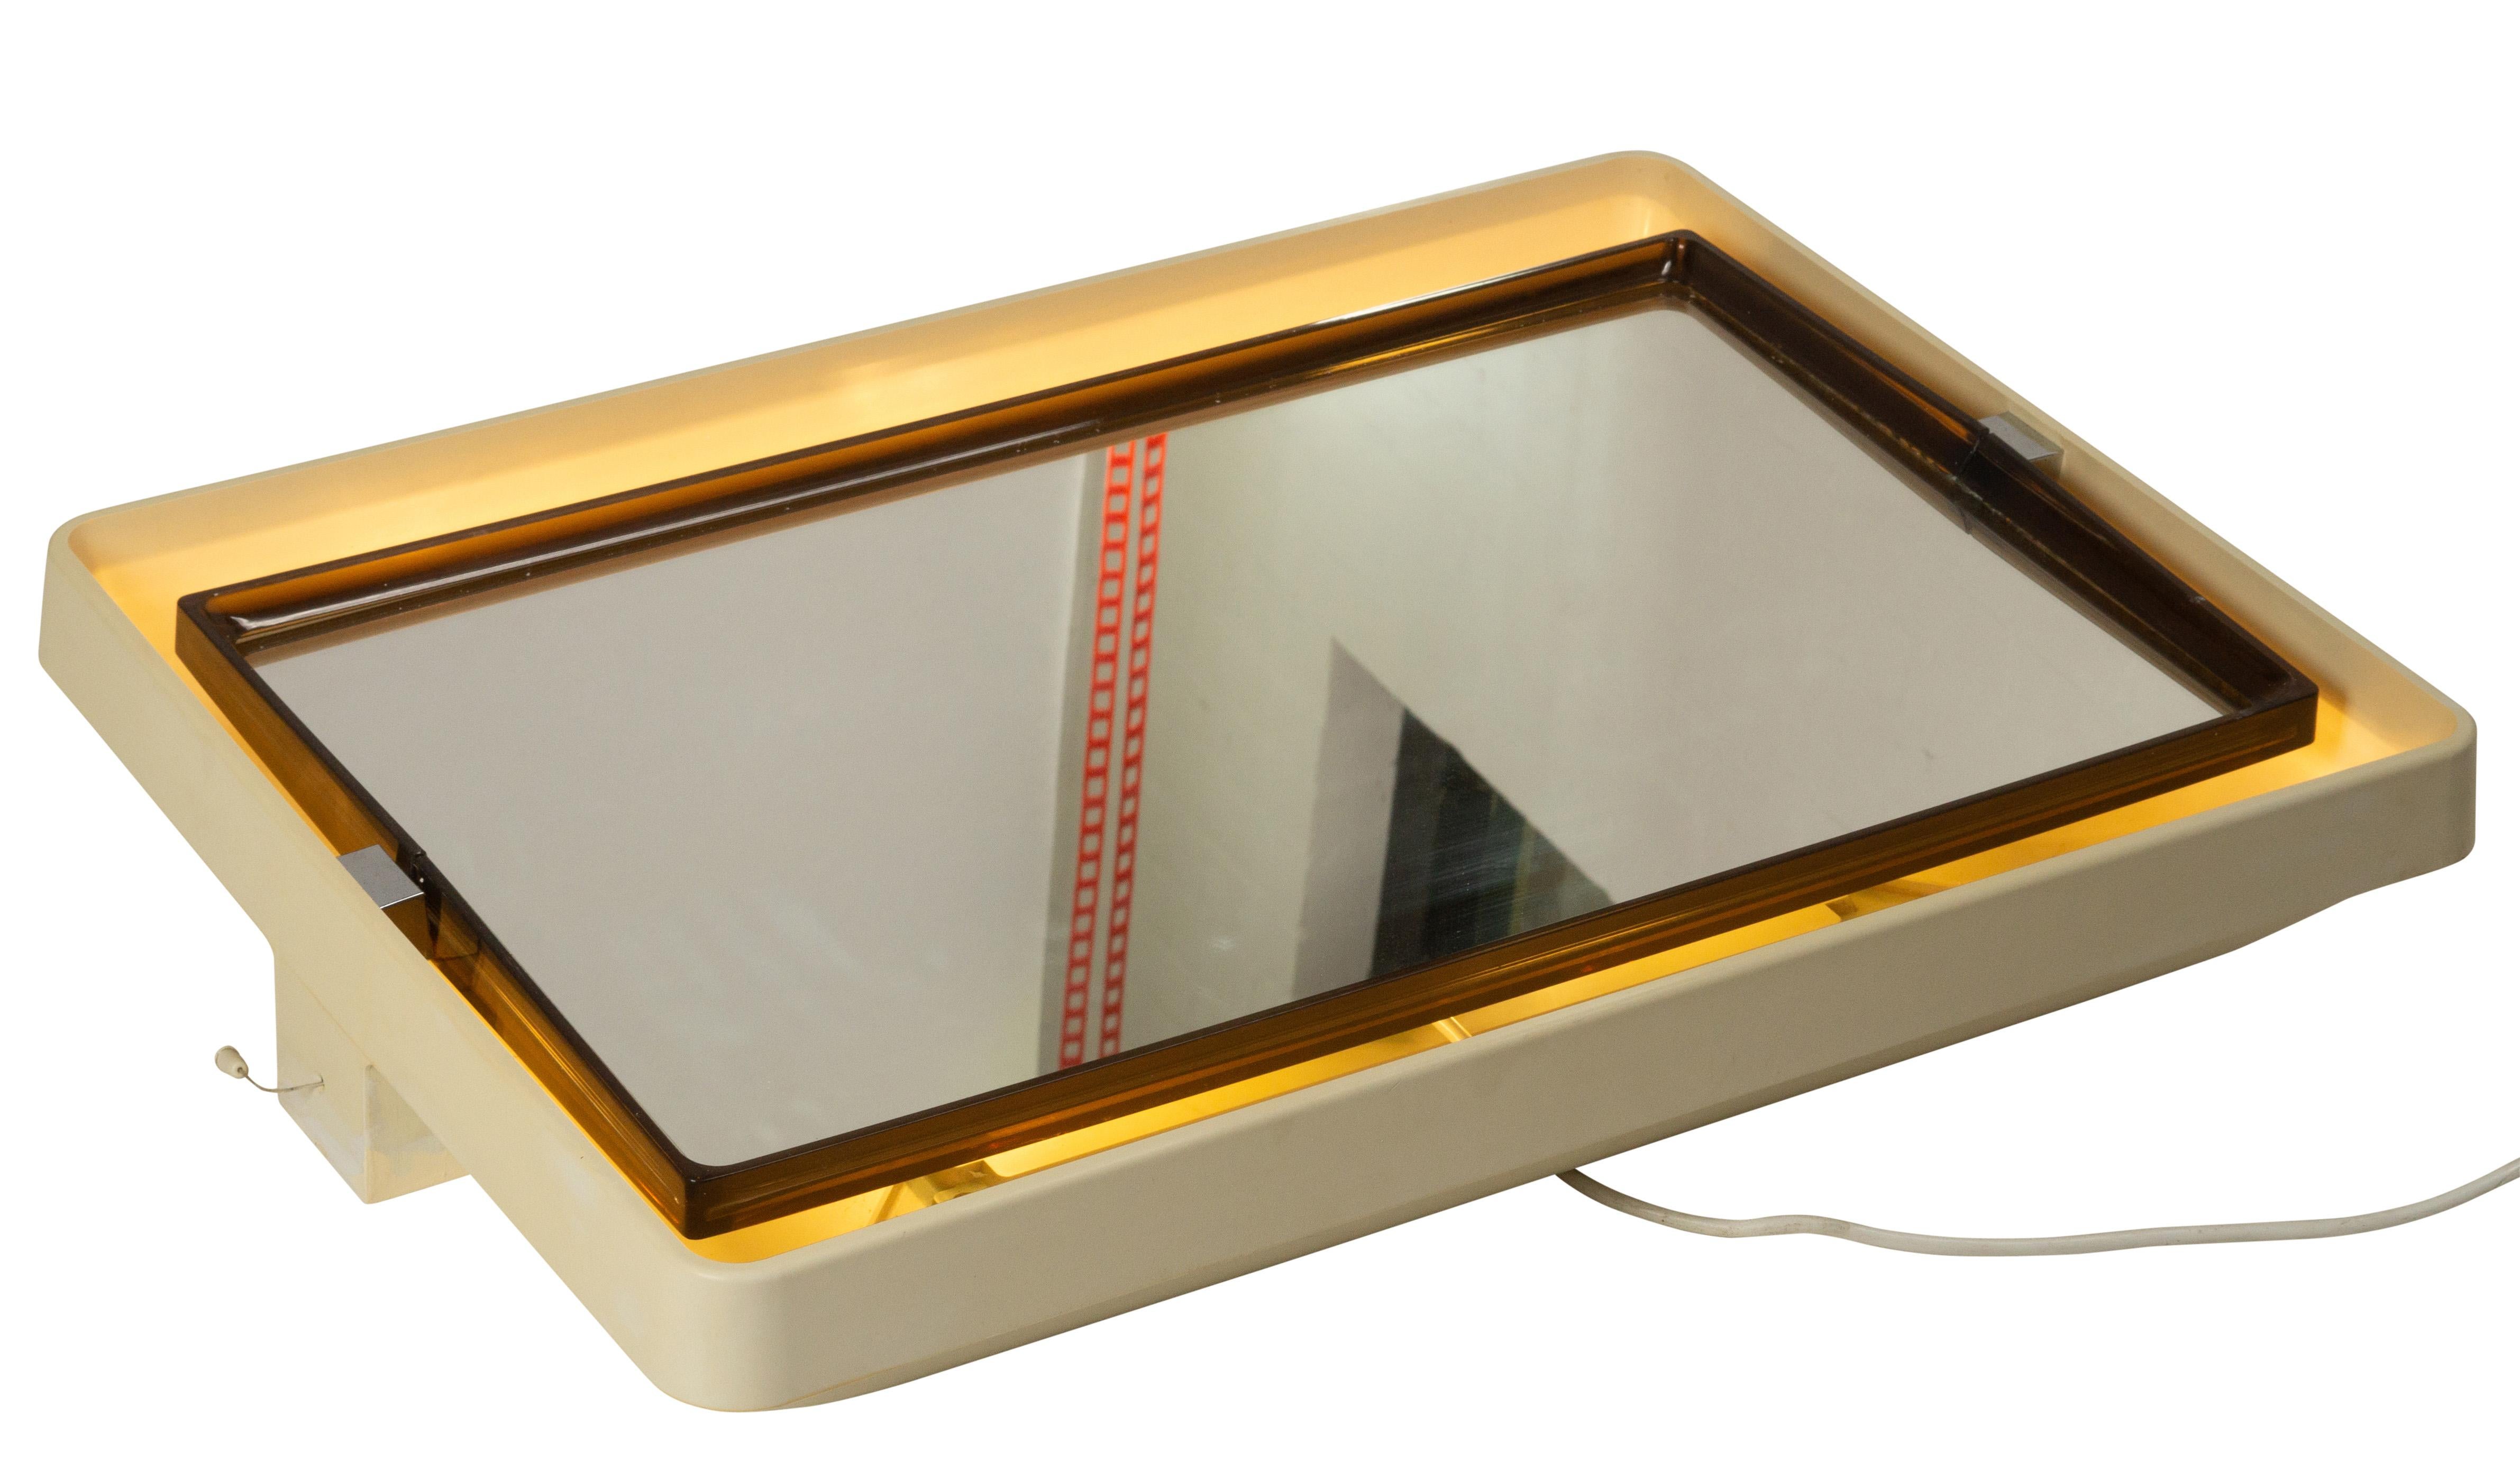 Allibert A109 space age wall mirror.

The typical plastic design that characterizes the 1970s. The chrome caps have light signs of aging. There is some paint on the back, probably tried to paint around it when it was on the wall. 4 E14 lights go